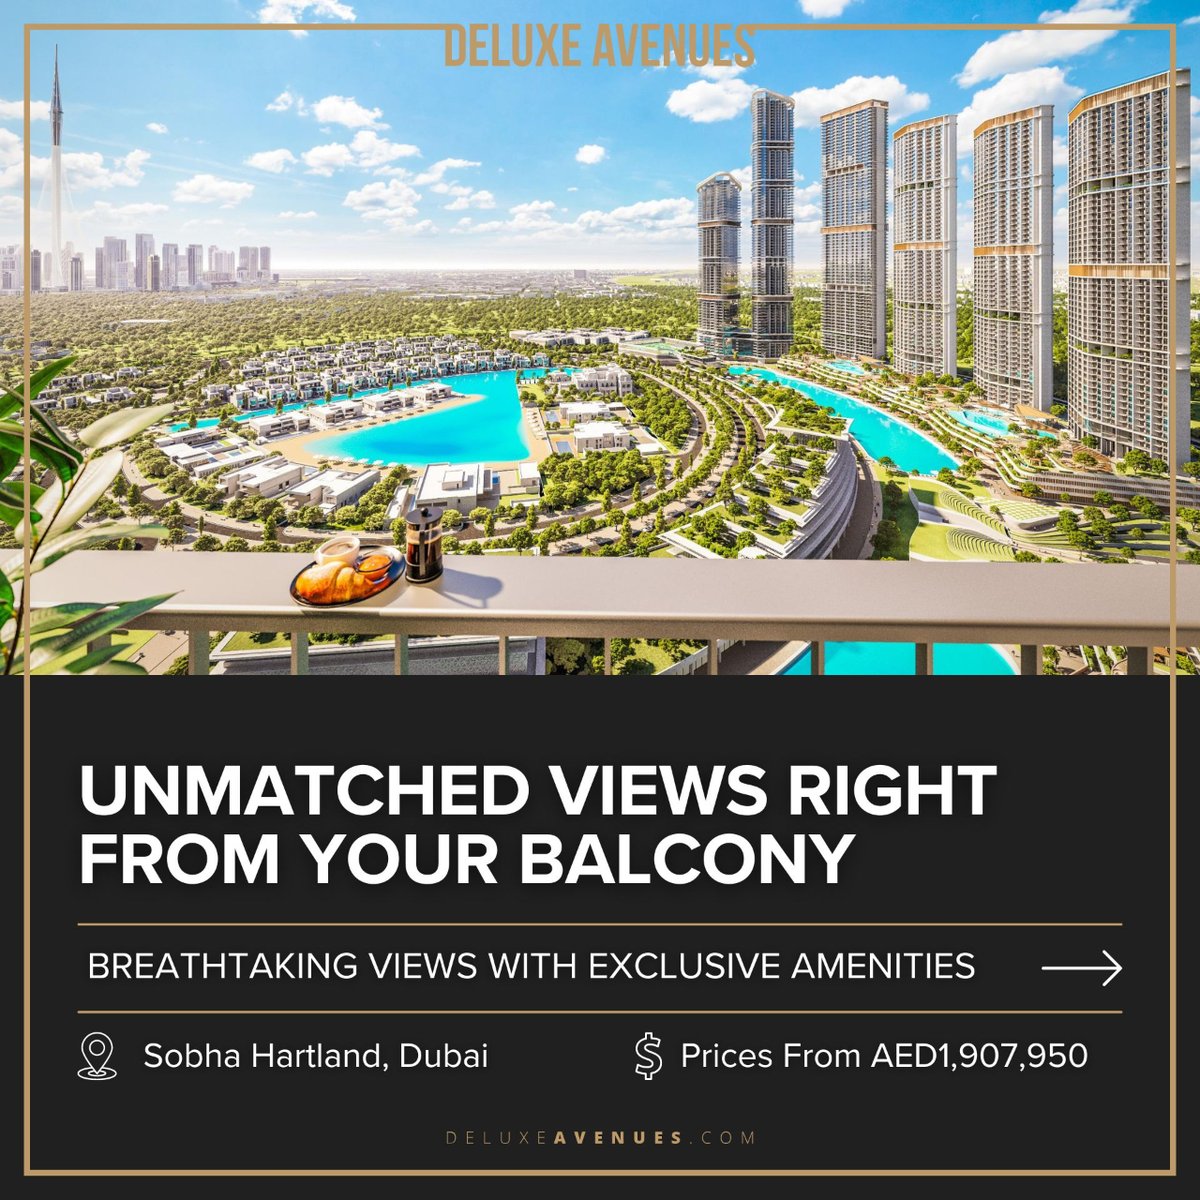 🏙️ Nestled in the vibrant heart of #Dubai #RiversideCrescent offers the perfect blend of tranquility and city life.

👉 Learn more at davenues.com/dubai/riversid…

#DubaiLiving #LuxuryLiving #DeluxeAvenues #RealEstate #Investment #Dubai #DubaiRealEstate #DubaiAvenues